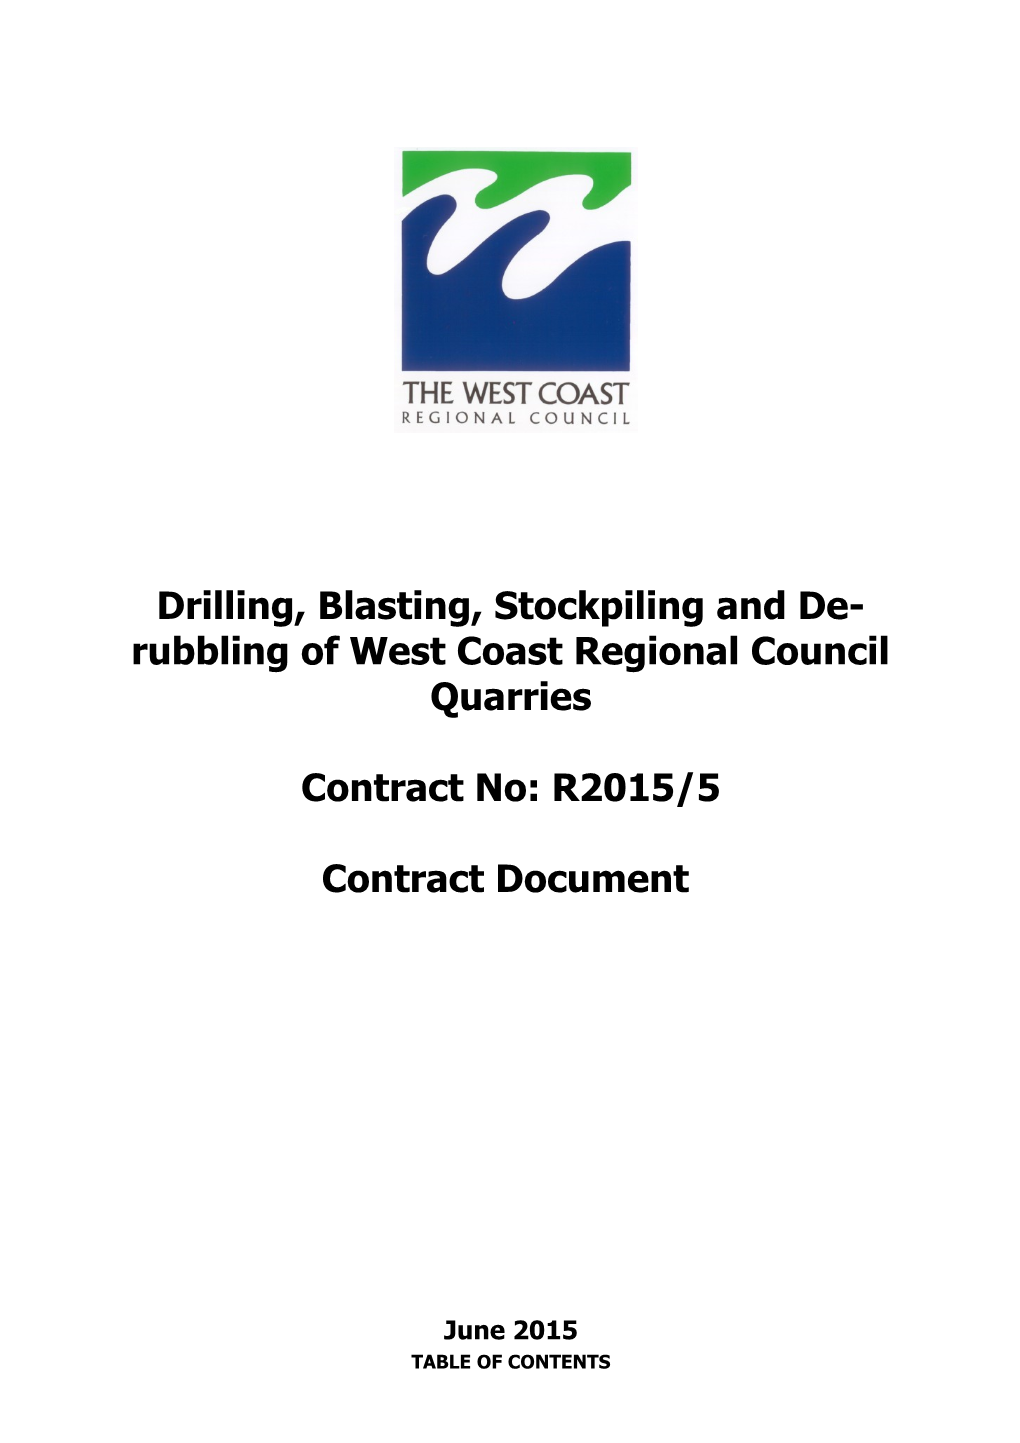 Drilling, Blasting, Stockpiling and De-Rubbling of West Coast Regional Council Quarries